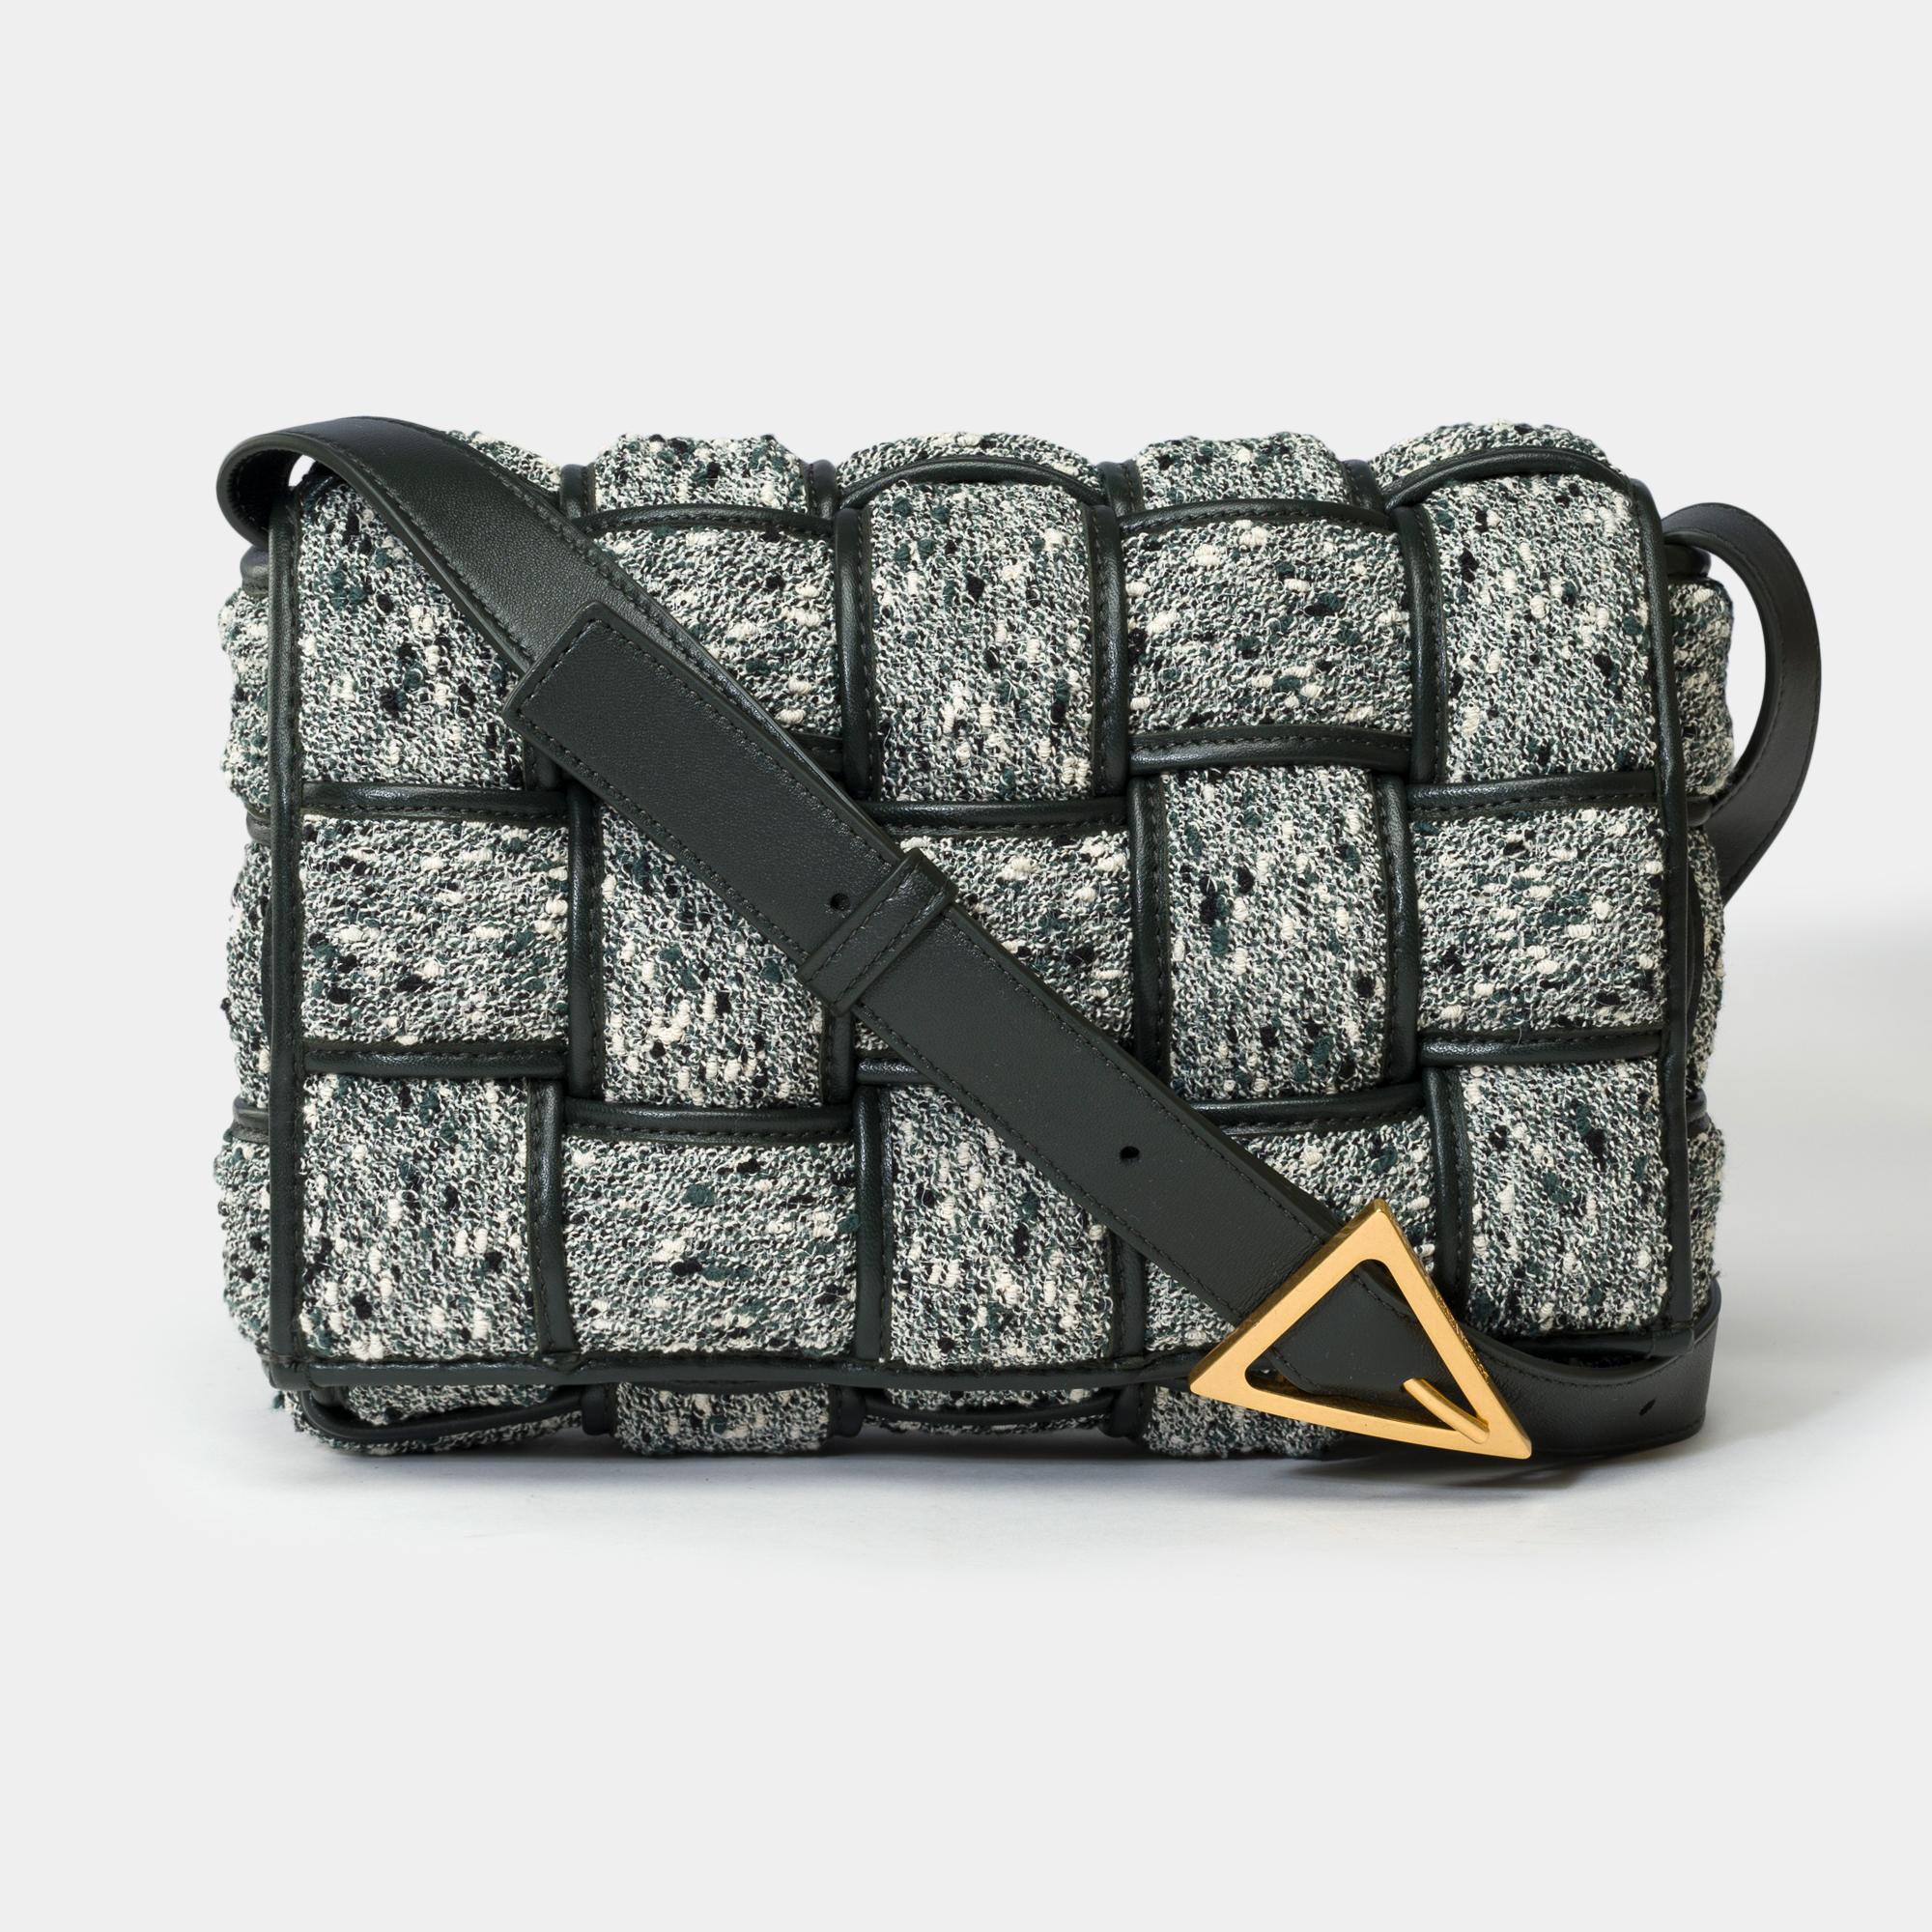 The​ ​Cassette​ ​Crossbody​ ​Bag​ ​by​ ​Bottega​ ​Veneta​ ​is​ ​made​ ​of​ ​grey​ ​and​ ​green​ ​padded​ ​tweed​ ​with​ ​a​ ​black​ ​lambskin​ ​interior,​ ​gold​ ​metal​ ​trim,​ ​adjustable​ ​shoulder​ ​strap​ ​in​ ​black​ ​leather​ ​for​ ​shoulder​